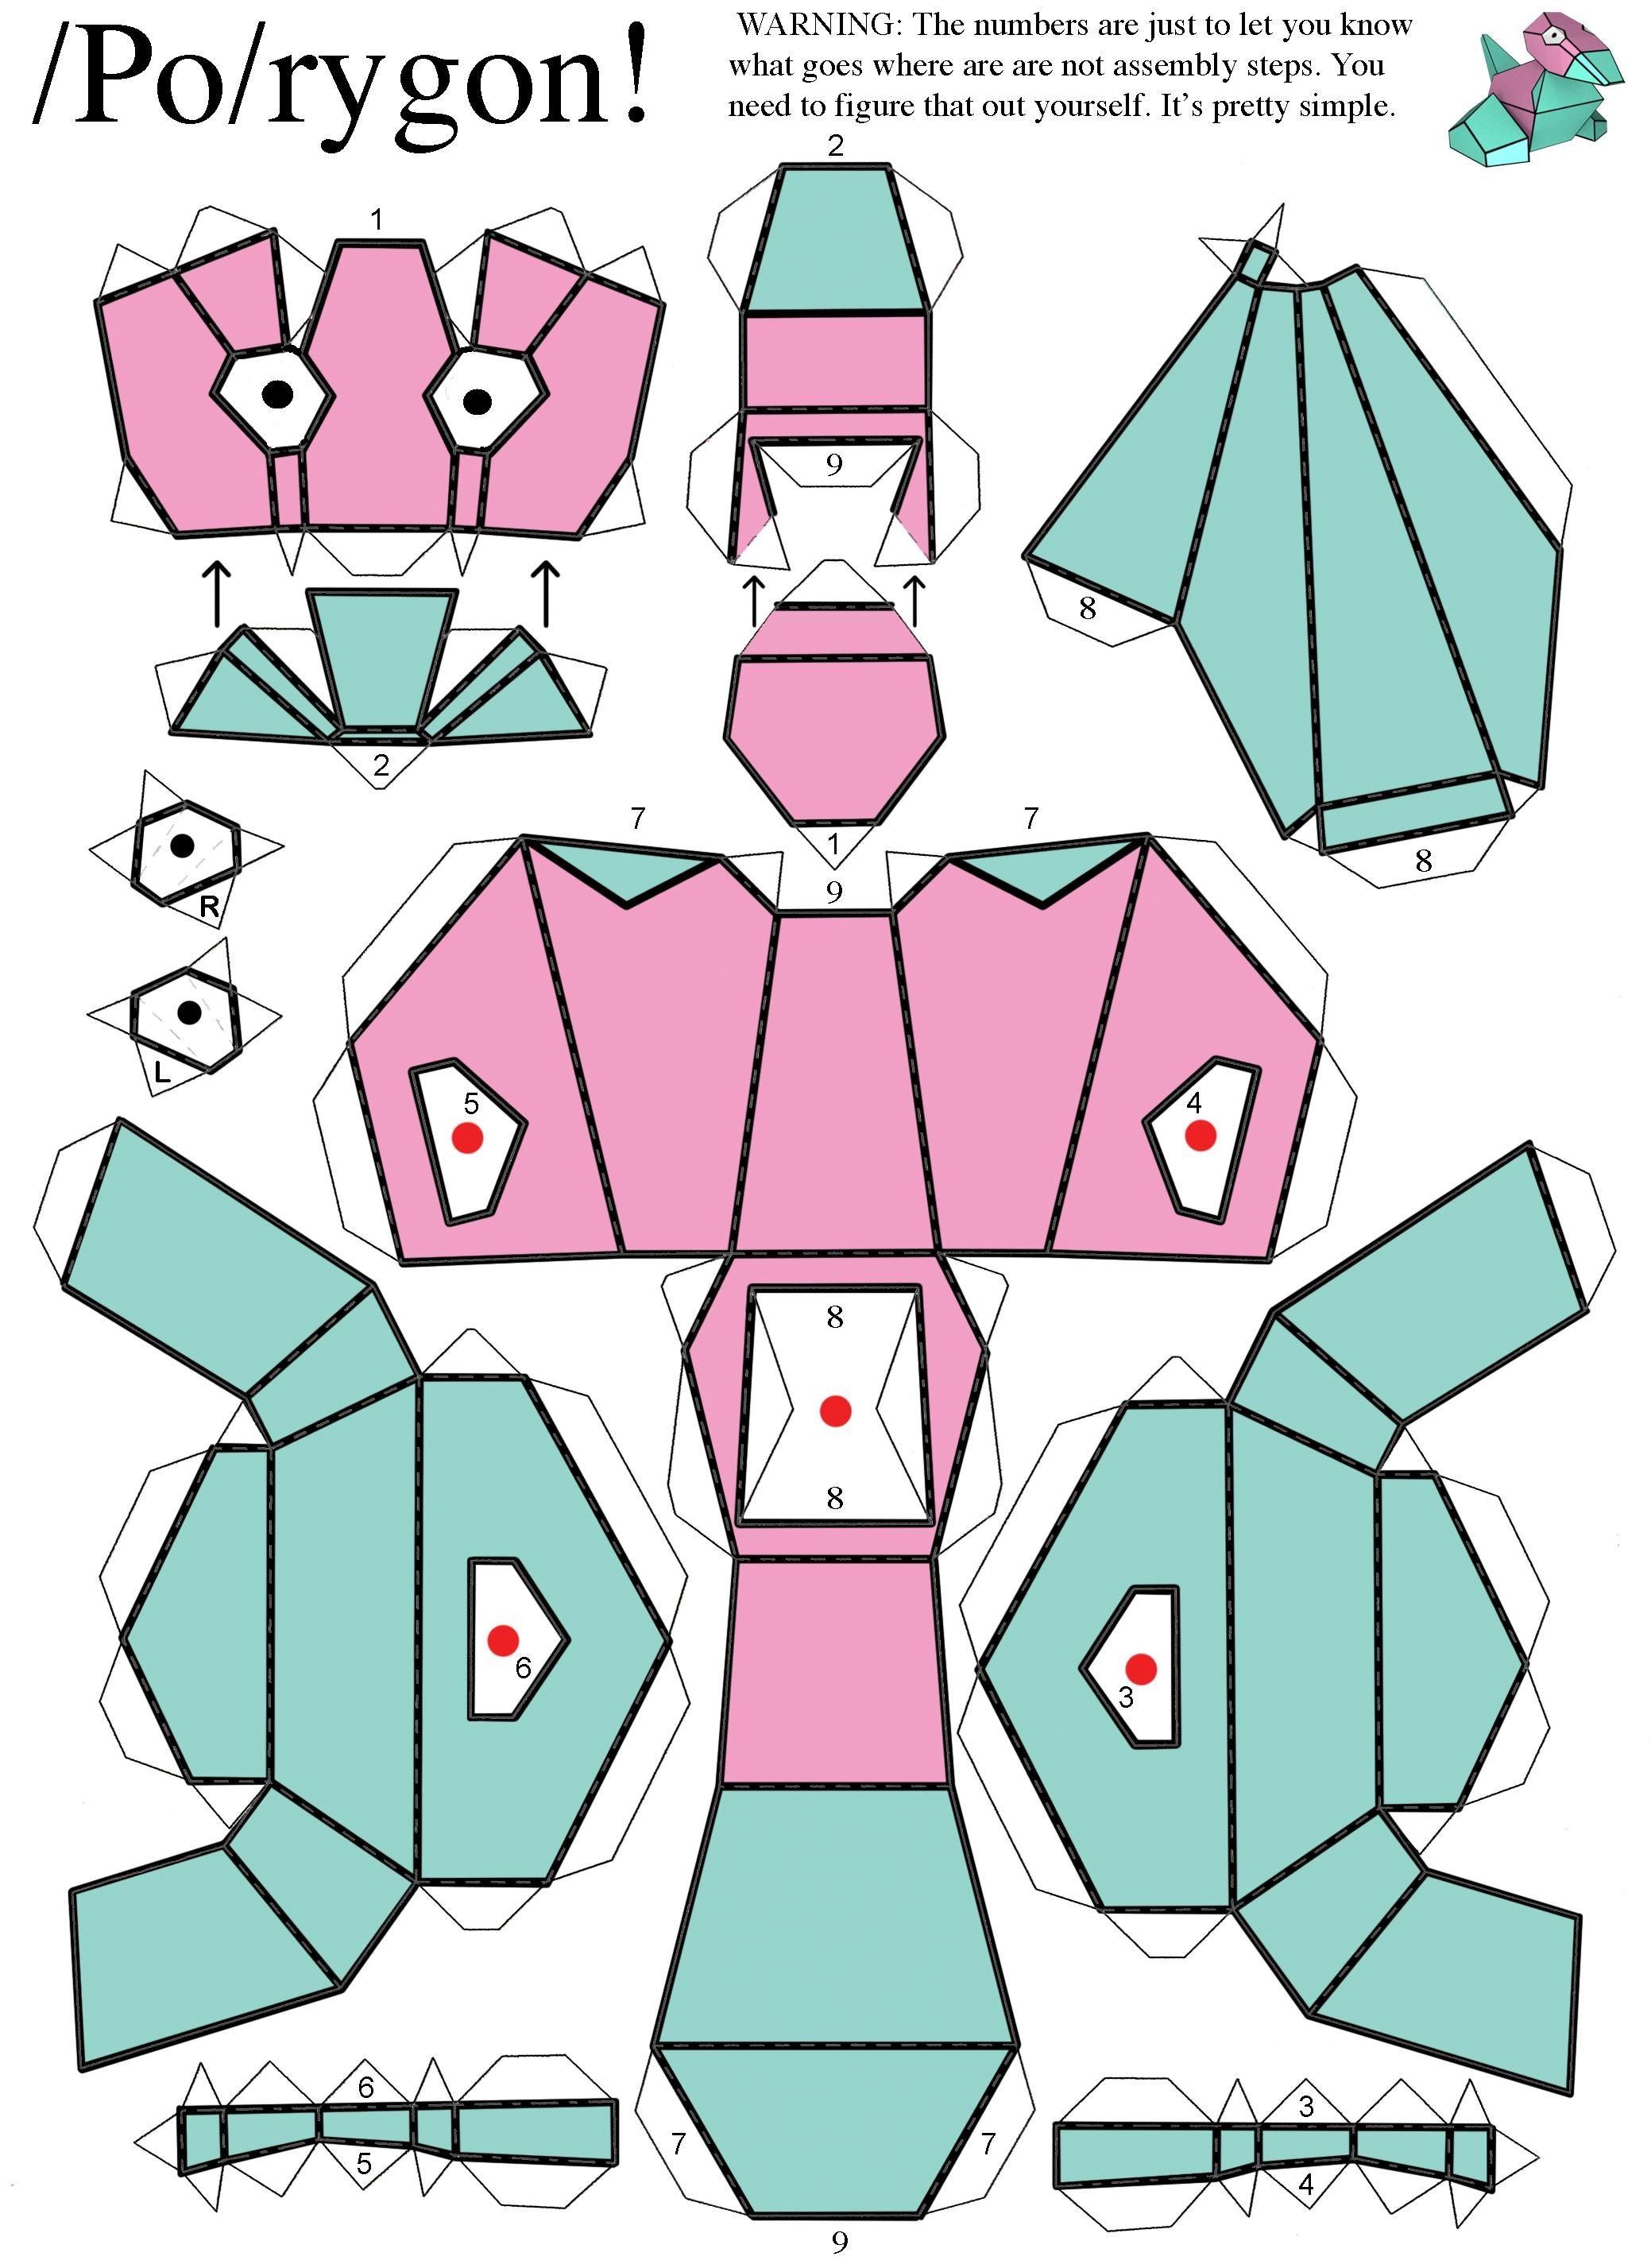 Human Papercraft Porygon From Pokemon Difficulty Level Easy Pokemon